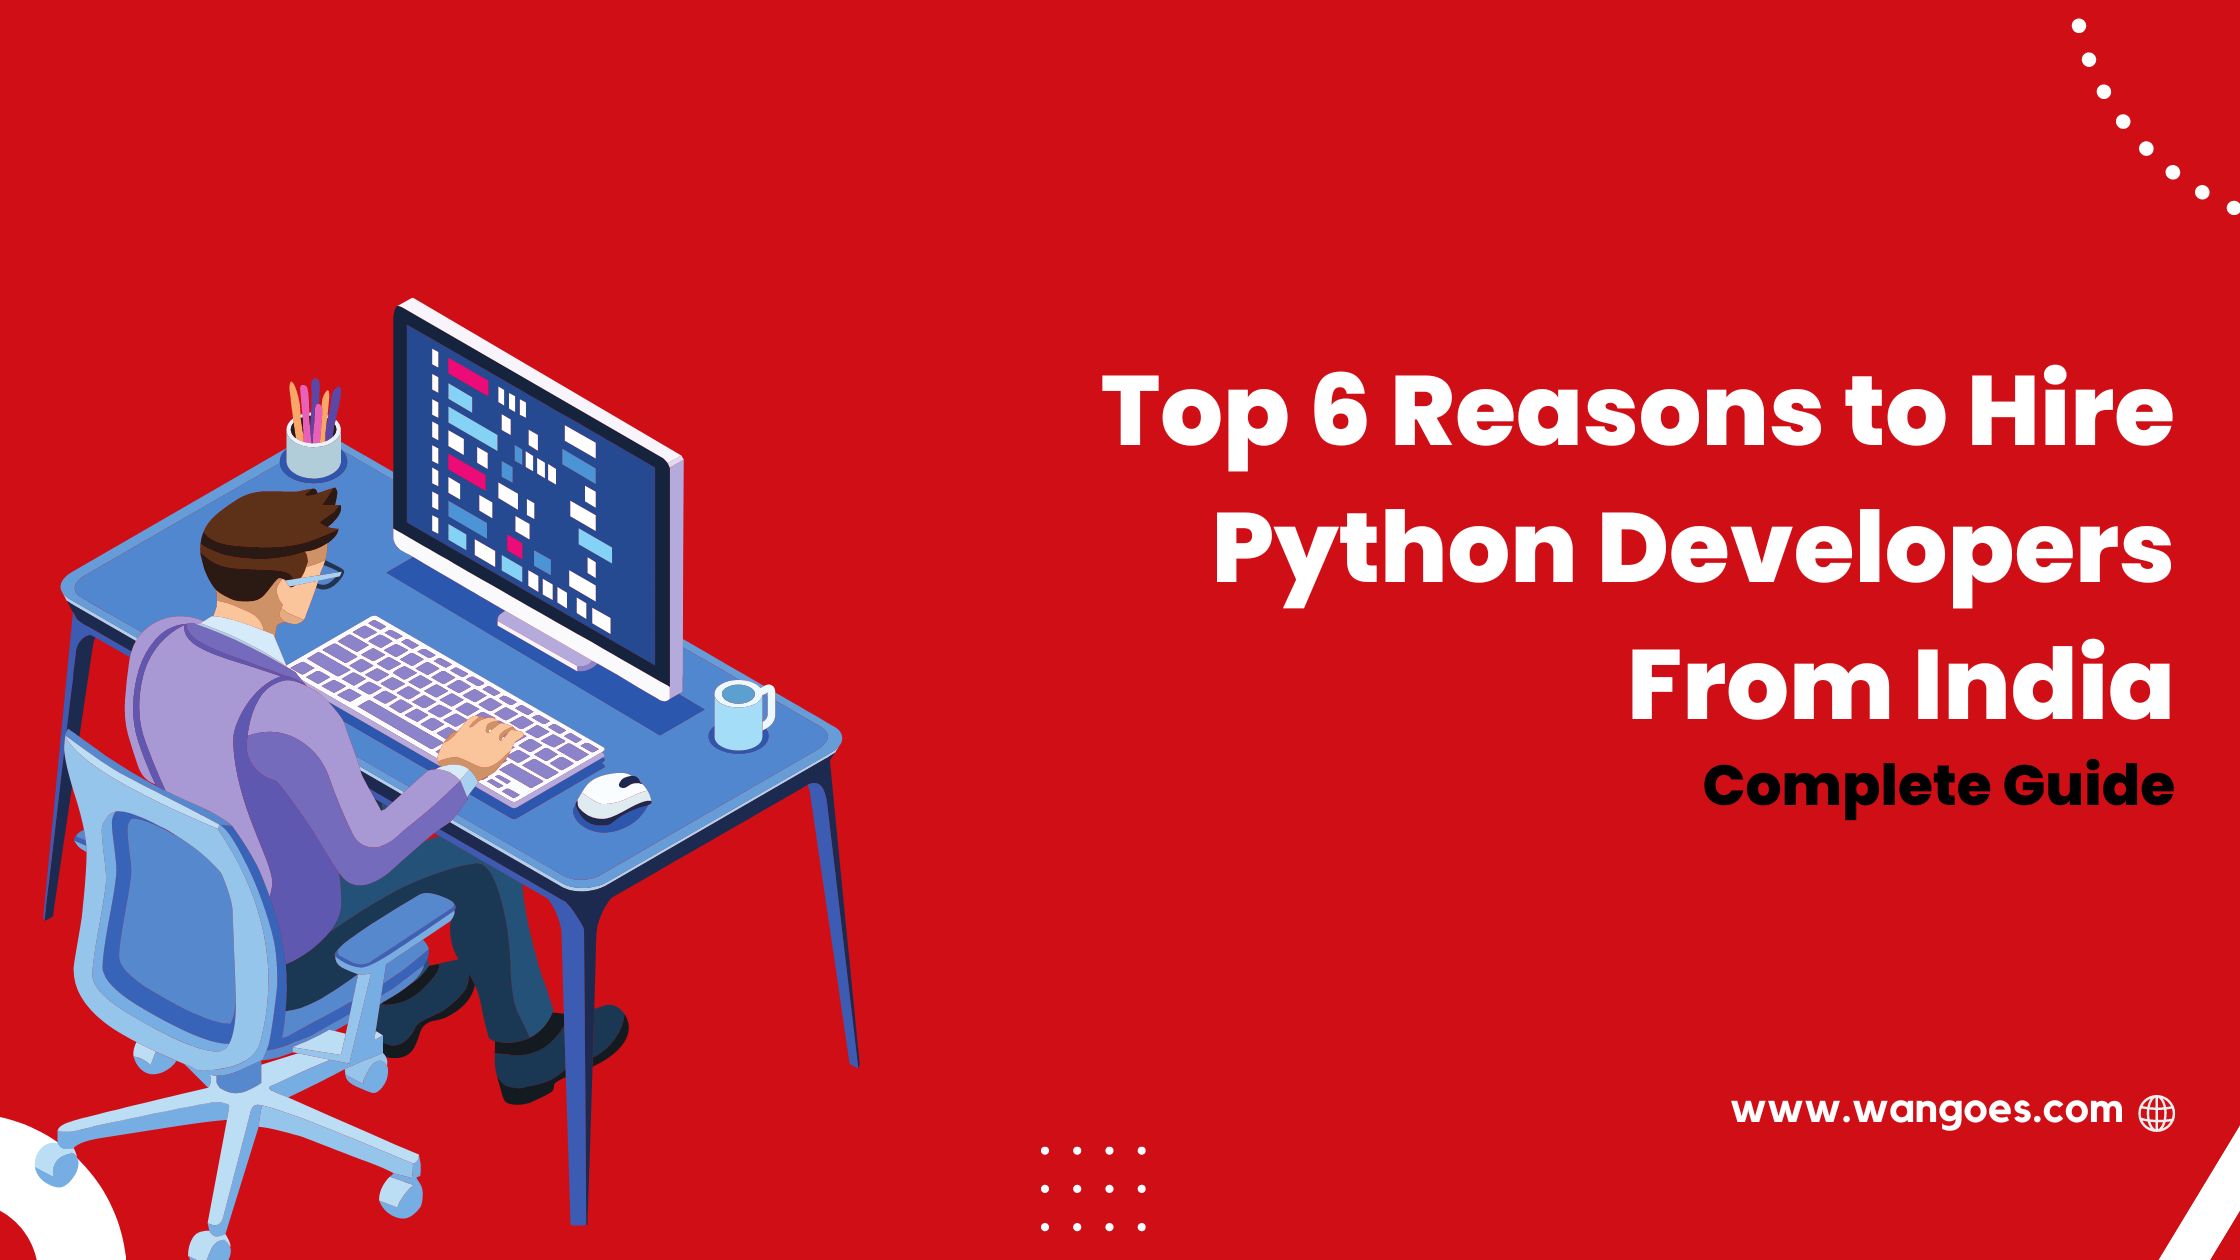 Top 6 Reasons to Hire Python Developers From India